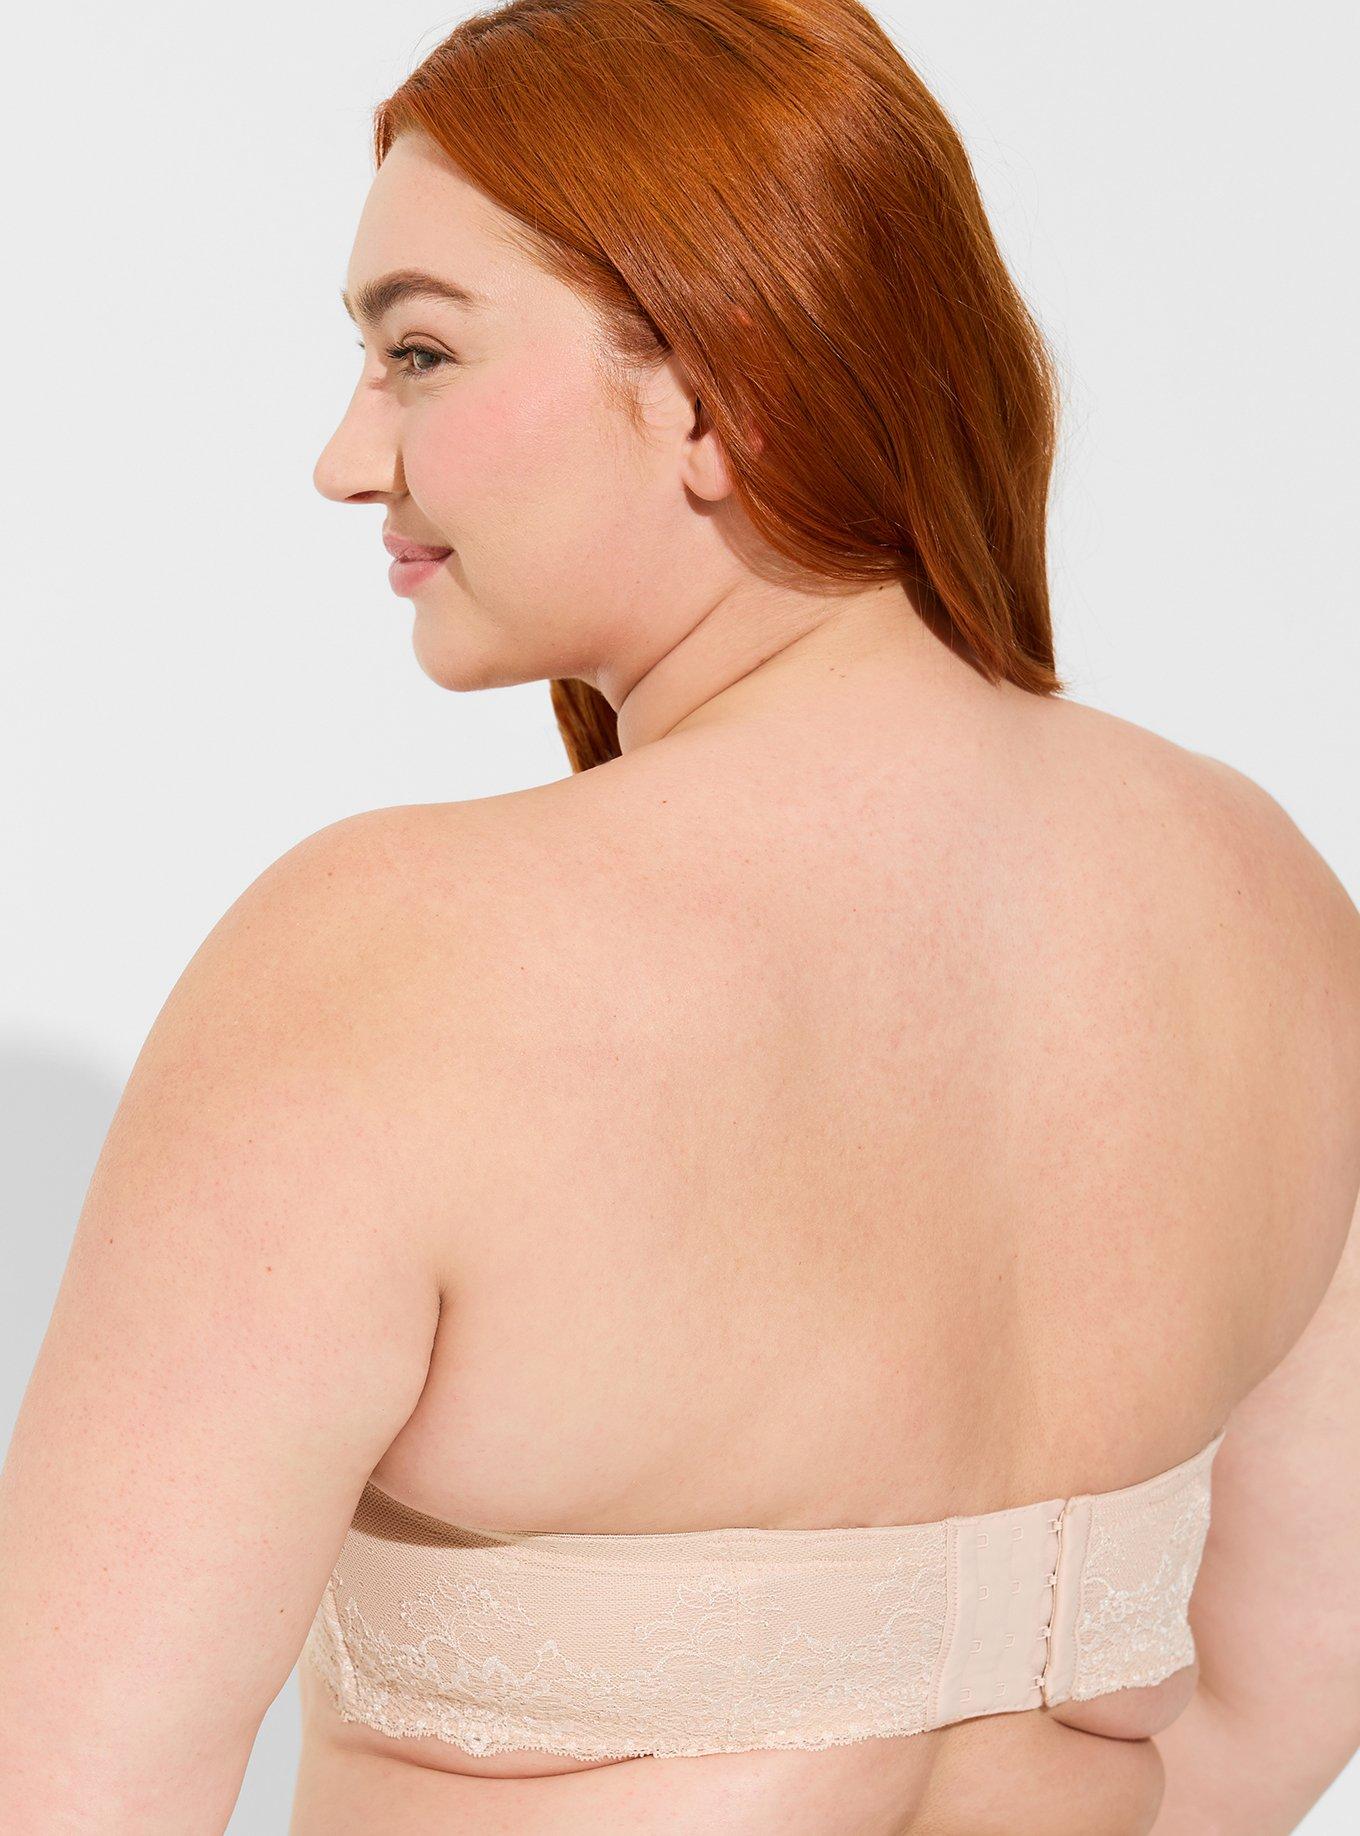 this is THE G cup strapless bra I've been searching for, obsessed. Use